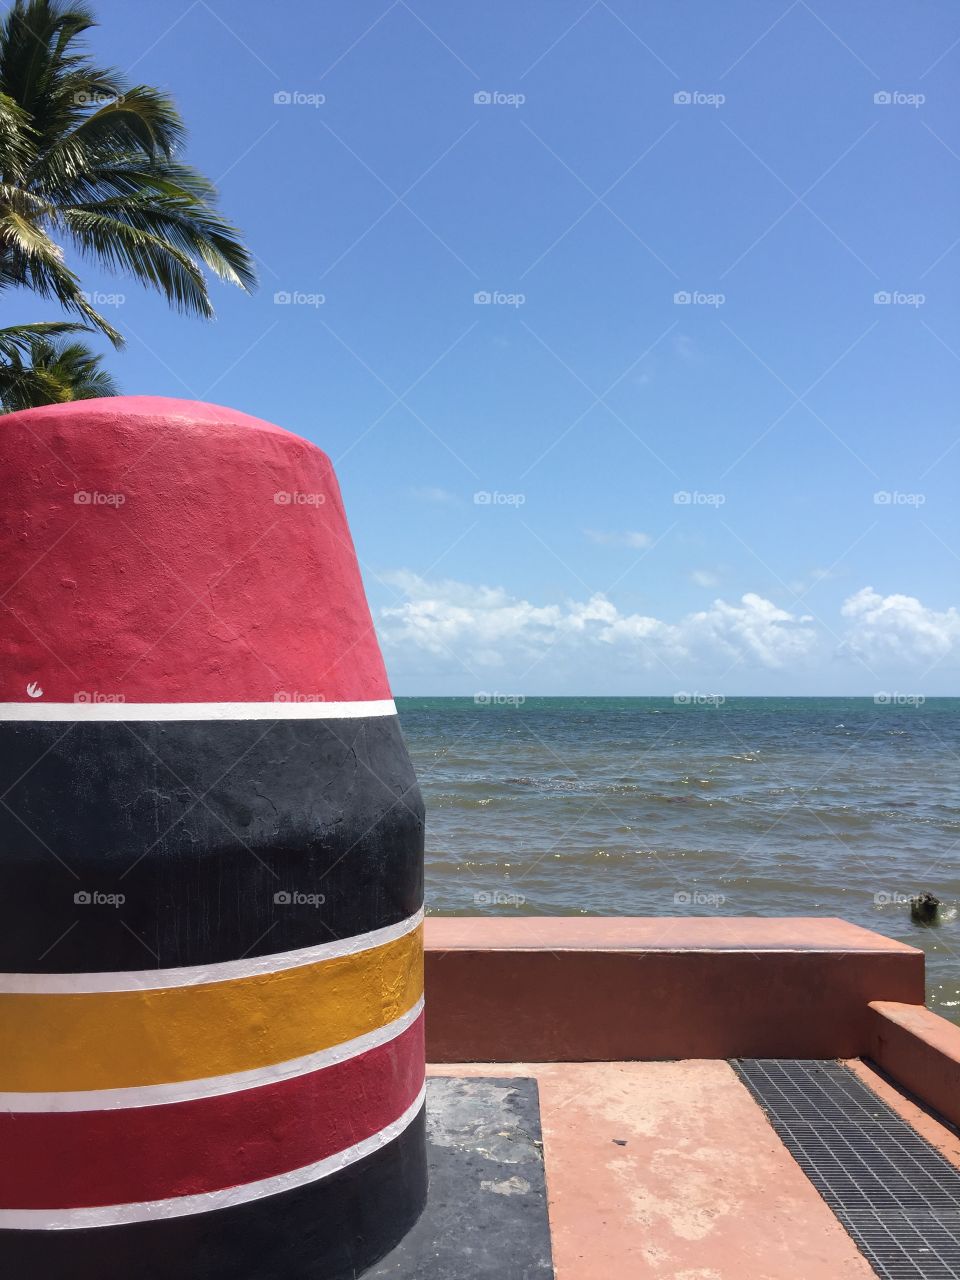 Southernmost point in continental United States. This is 90 miles away from Cuba, in Key West, Florida Keys.